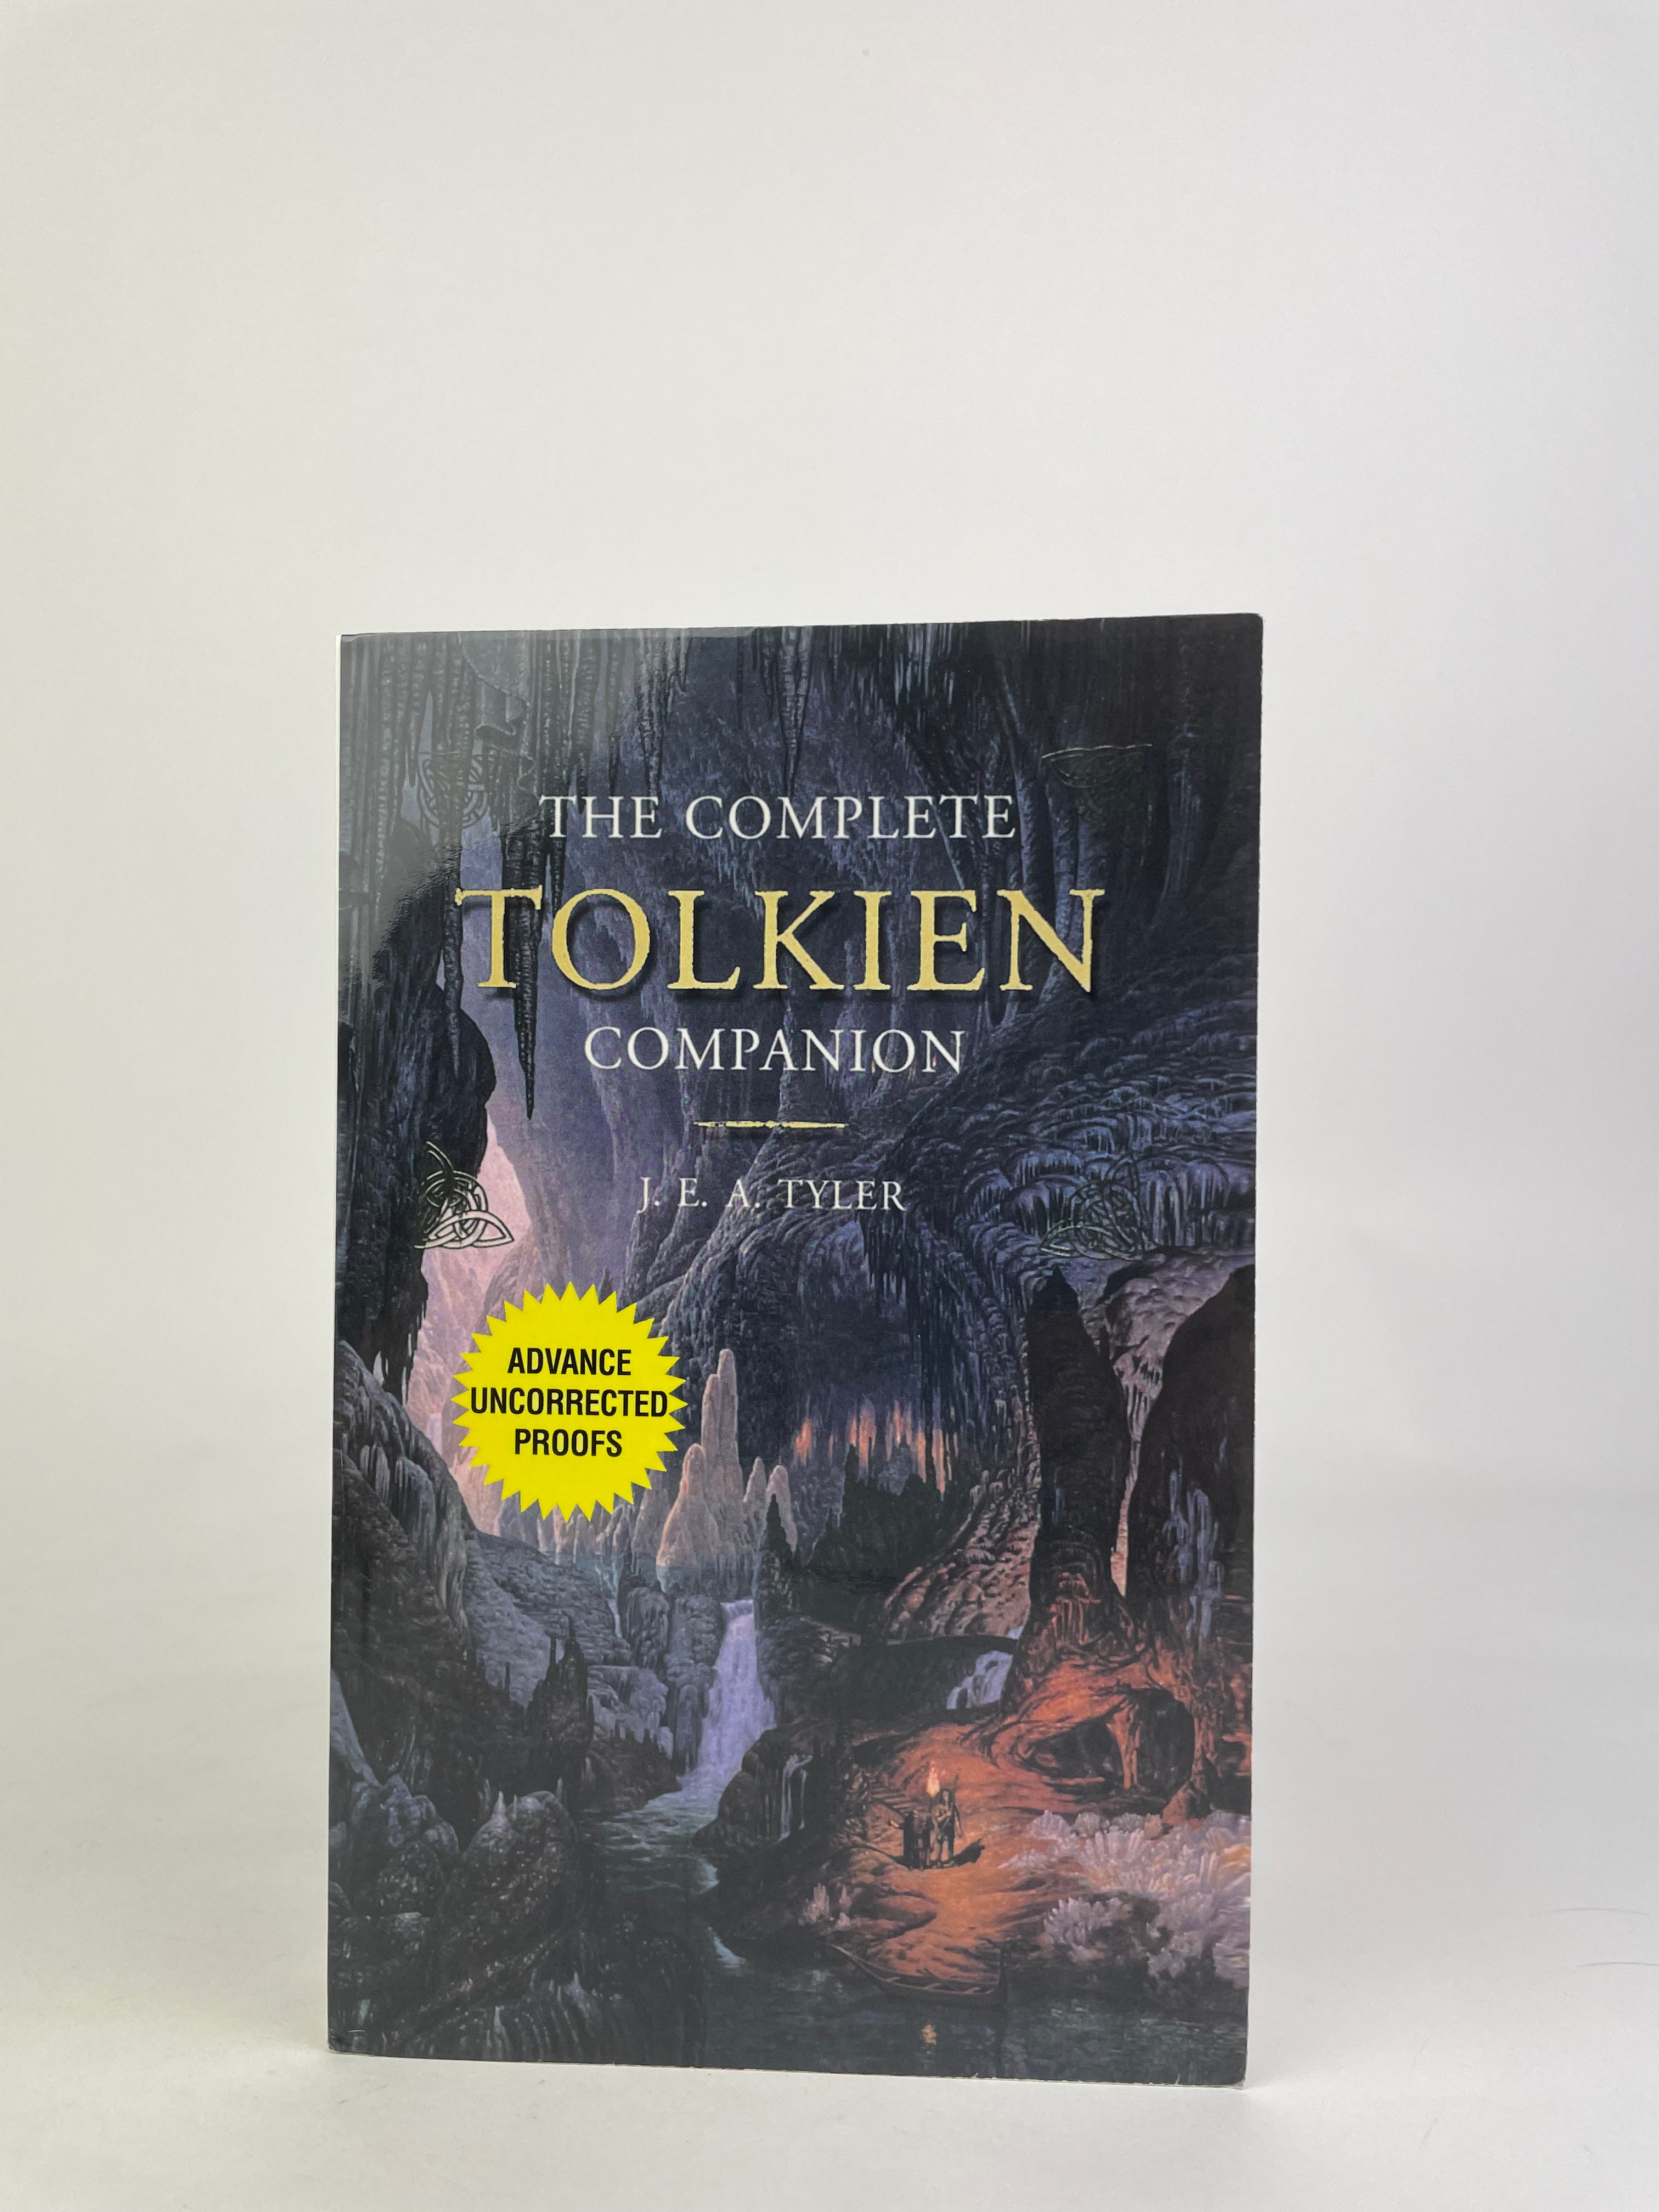 Advance Uncorrected Proof of The Complete Tolkien Companion by J. E. A. Tyler published by Thomas Dunne Books, 2004